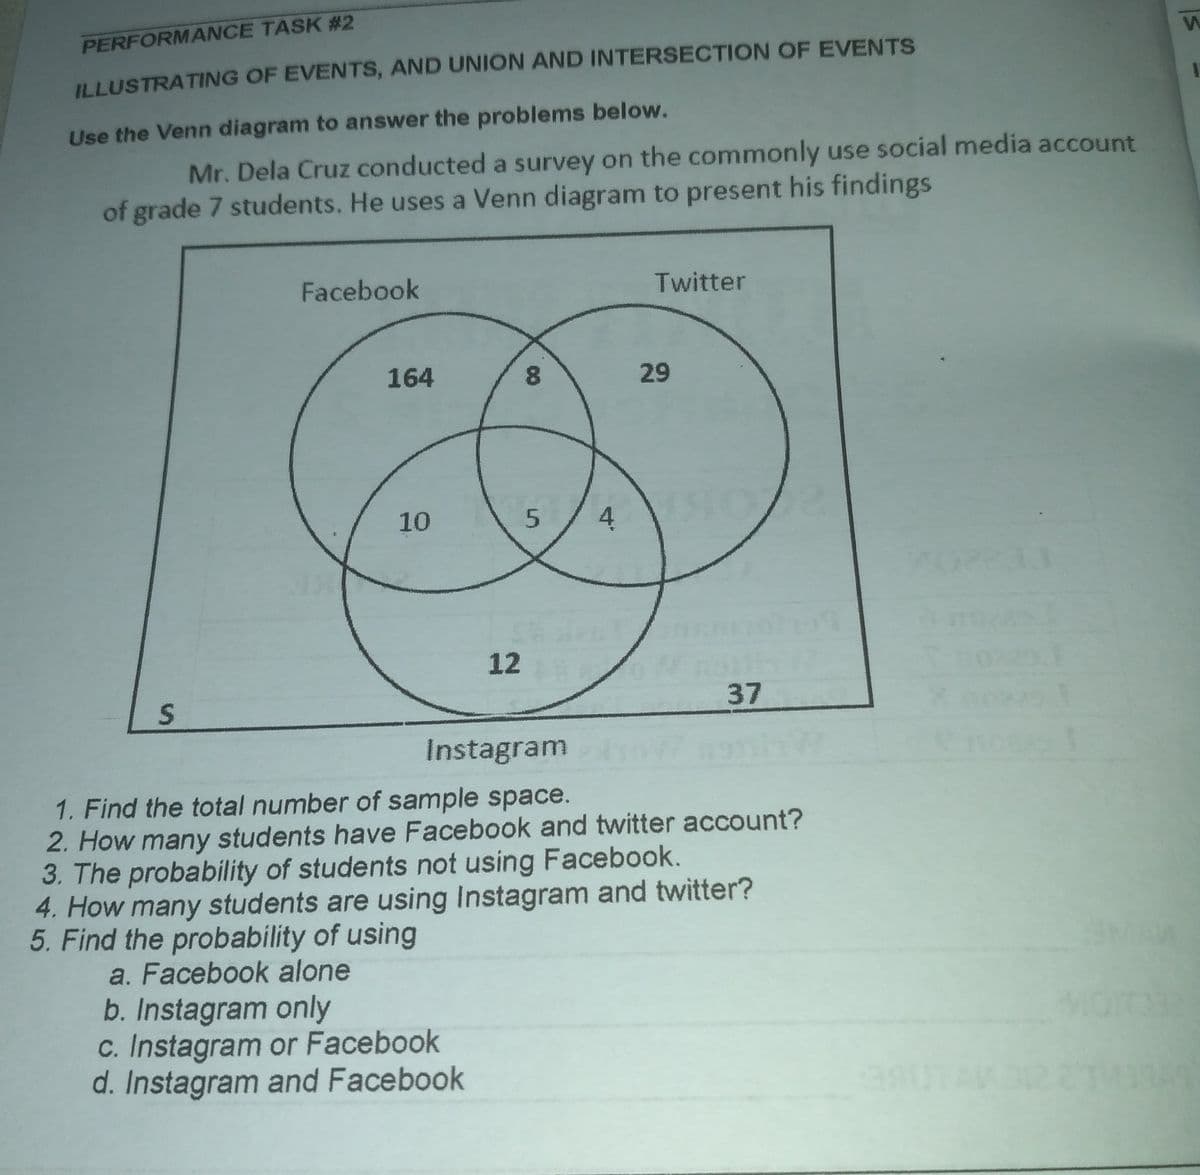 PERFORMANCE TASK # 2
ILLUSTRATING OF EVENTS, AND UNION AND INTERSECTION OF EVENTS
Use the Venn diagram to answer the problems below.
Mr. Dela Cruz conducted a survey on the commonly use social media account
of grade 7 students. He uses a Venn diagram to present his findings
Facebook
Twitter
164
8.
29
10
4
12
37
Instagram
enoe
1. Find the total number of sample space.
2. How many students have Facebook and twitter account?
3. The probability of students not using Facebook.
4. How many students are using Instagram and twitter?
5. Find the probability of using
a. Facebook alone
b. Instagram only
c. Instagram or Facebook
d. Instagram and Facebook
00
5.
